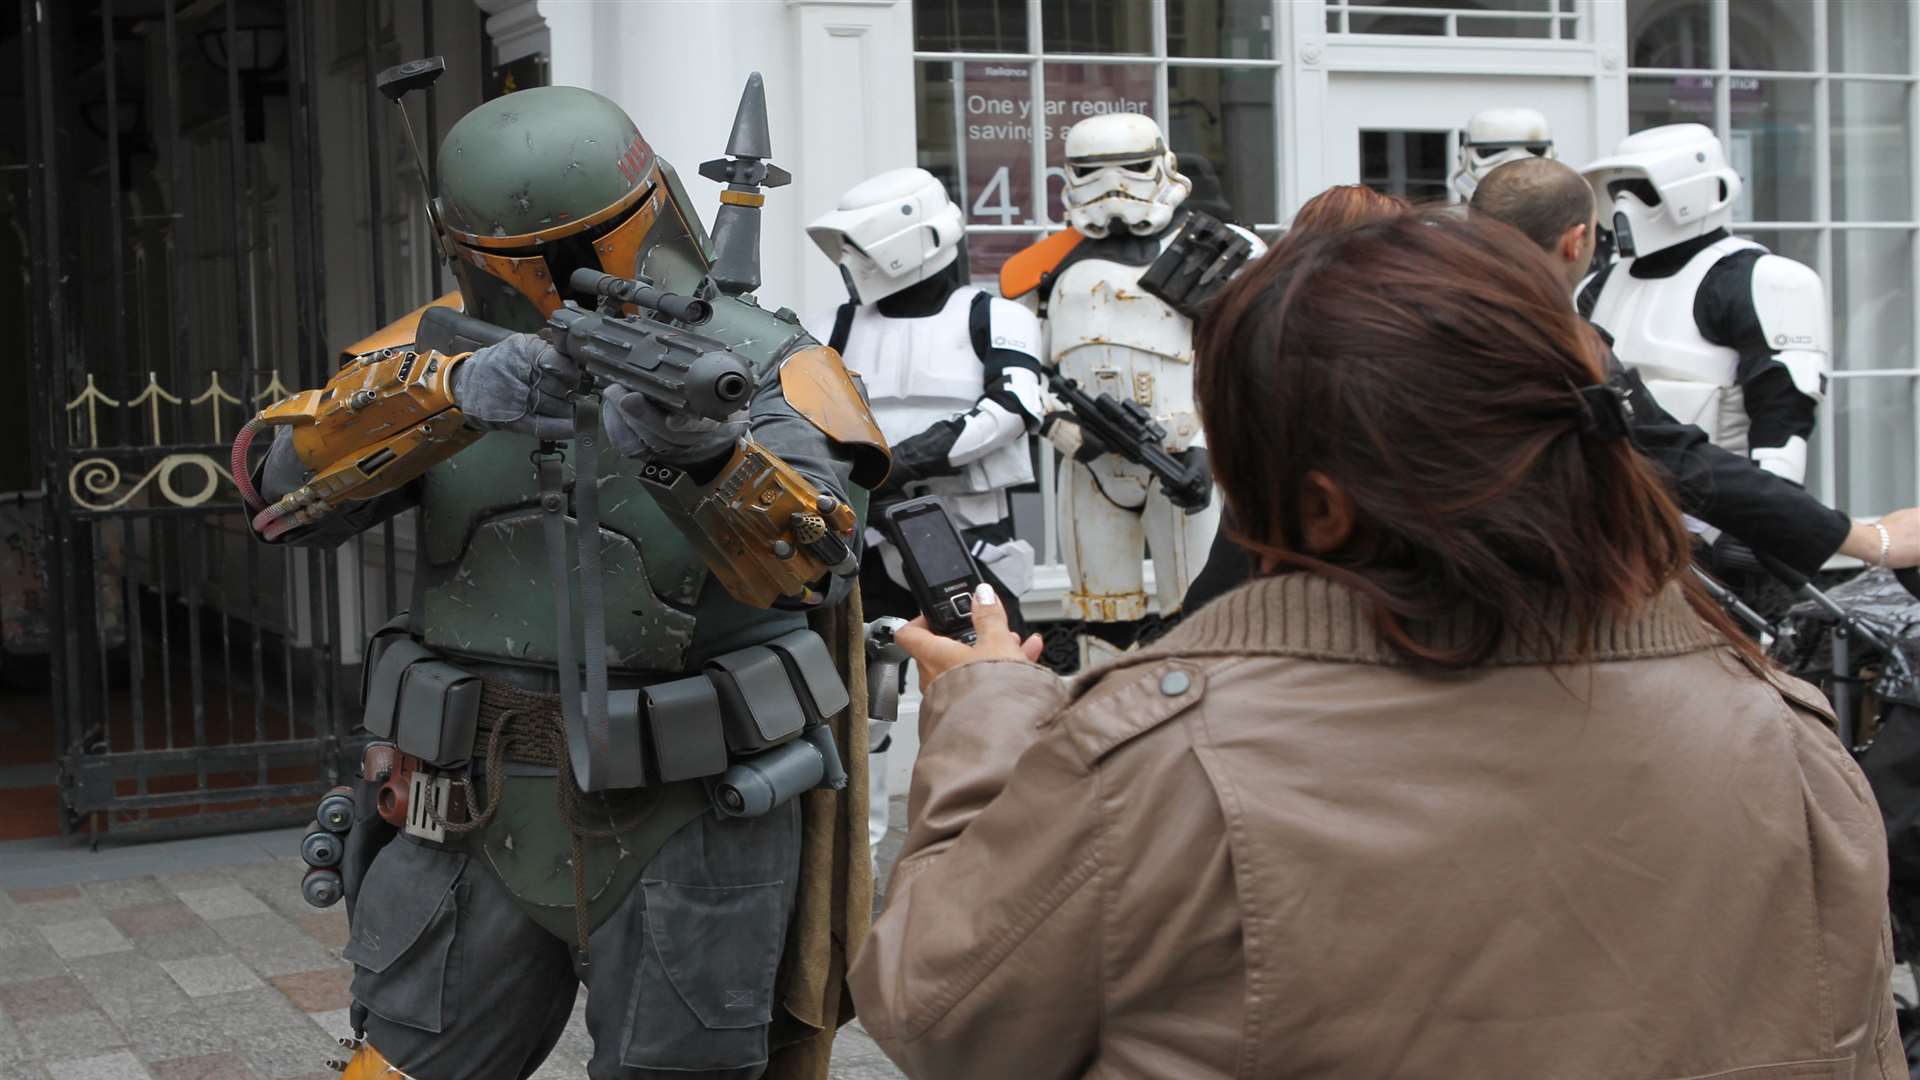 Passers-by come face to face with Star Wars characters at a previous convention